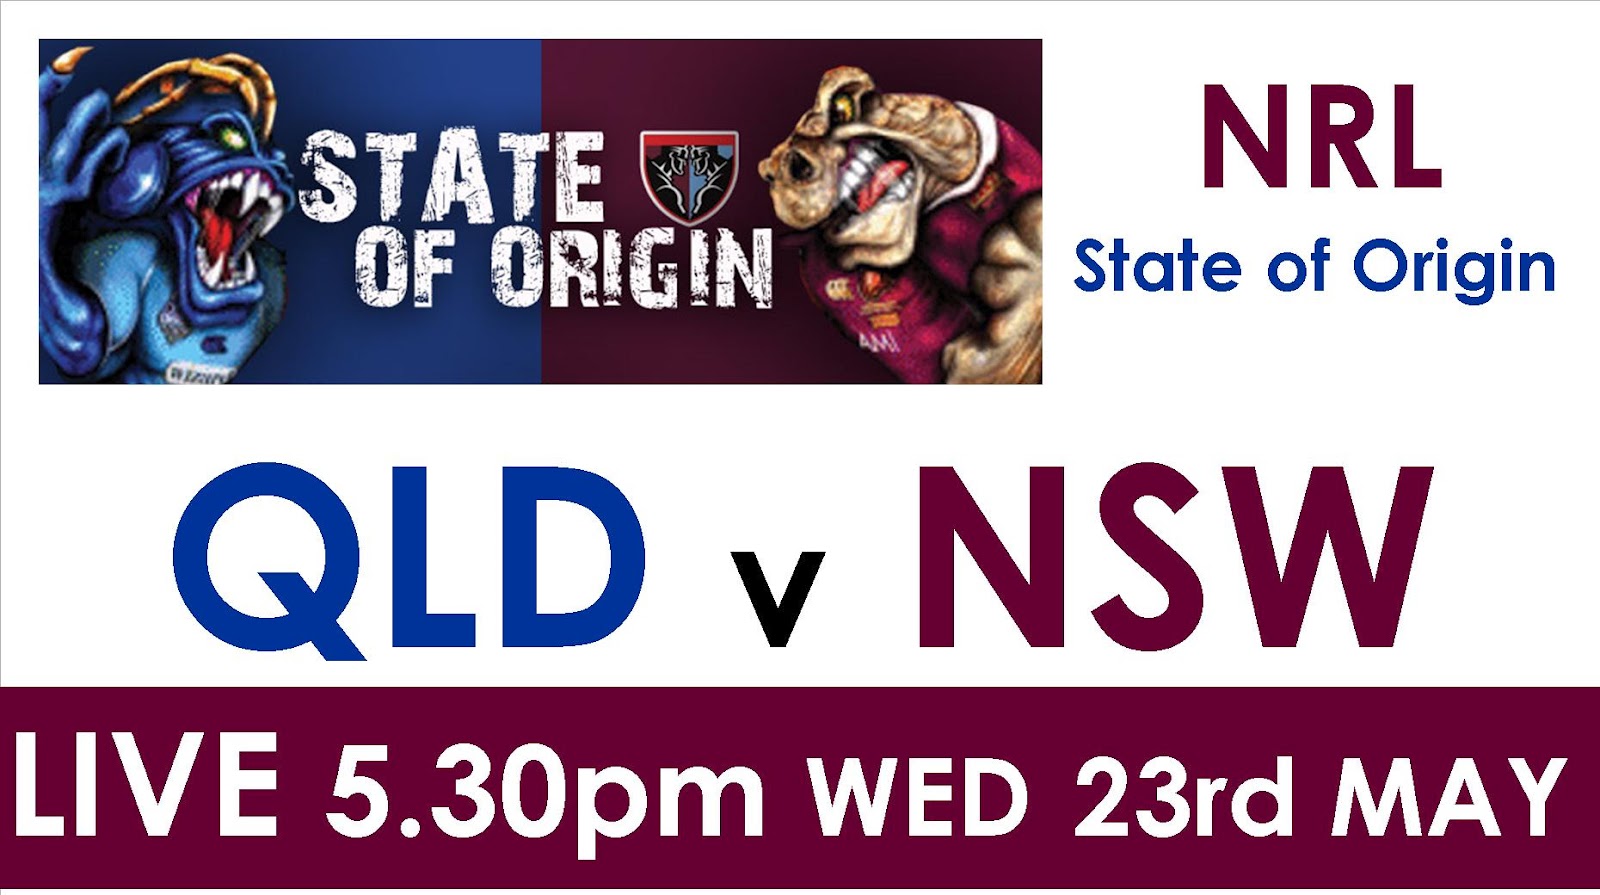 WATCH NRL: Watch State Of Origin Game 1 Live Streaming Online Free1600 x 895